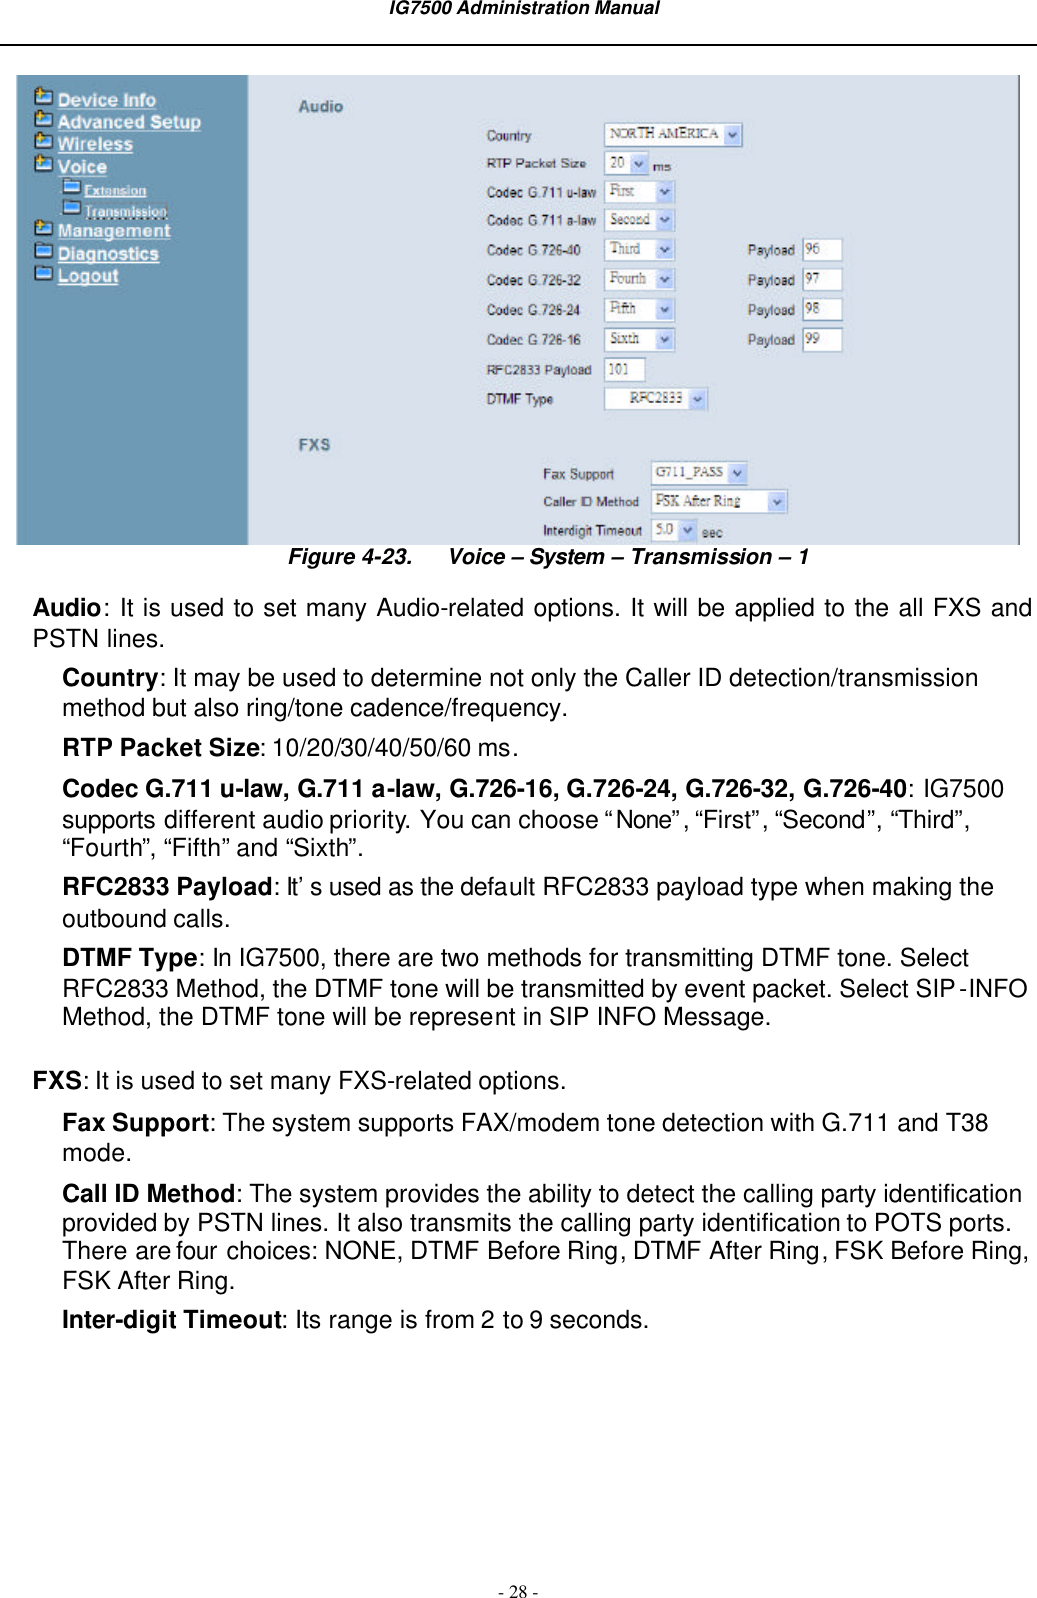  IG7500 Administration Manual  - 28 -  Figure 4-23. Voice – System – Transmission – 1 Audio:  It is used to set many Audio-related options. It will be applied to the all FXS and PSTN lines. Country: It may be used to determine not only the Caller ID detection/transmission method but also ring/tone cadence/frequency. RTP Packet Size: 10/20/30/40/50/60 ms. Codec G.711 u-law, G.711 a-law, G.726-16, G.726-24, G.726-32, G.726-40: IG7500 supports different audio priority. You can choose “None”, “First”, “Second”, “Third”, “Fourth”, “Fifth” and “Sixth”. RFC2833 Payload: It’s used as the default RFC2833 payload type when making the outbound calls. DTMF Type: In IG7500, there are two methods for transmitting DTMF tone. Select RFC2833 Method, the DTMF tone will be transmitted by event packet. Select SIP-INFO Method, the DTMF tone will be represent in SIP INFO Message. FXS: It is used to set many FXS-related options. Fax Support: The system supports FAX/modem tone detection with G.711 and T38 mode. Call ID Method: The system provides the ability to detect the calling party identification provided by PSTN lines. It also transmits the calling party identification to POTS ports. There are four choices: NONE, DTMF Before Ring, DTMF After Ring, FSK Before Ring, FSK After Ring. Inter-digit Timeout: Its range is from 2 to 9 seconds. 